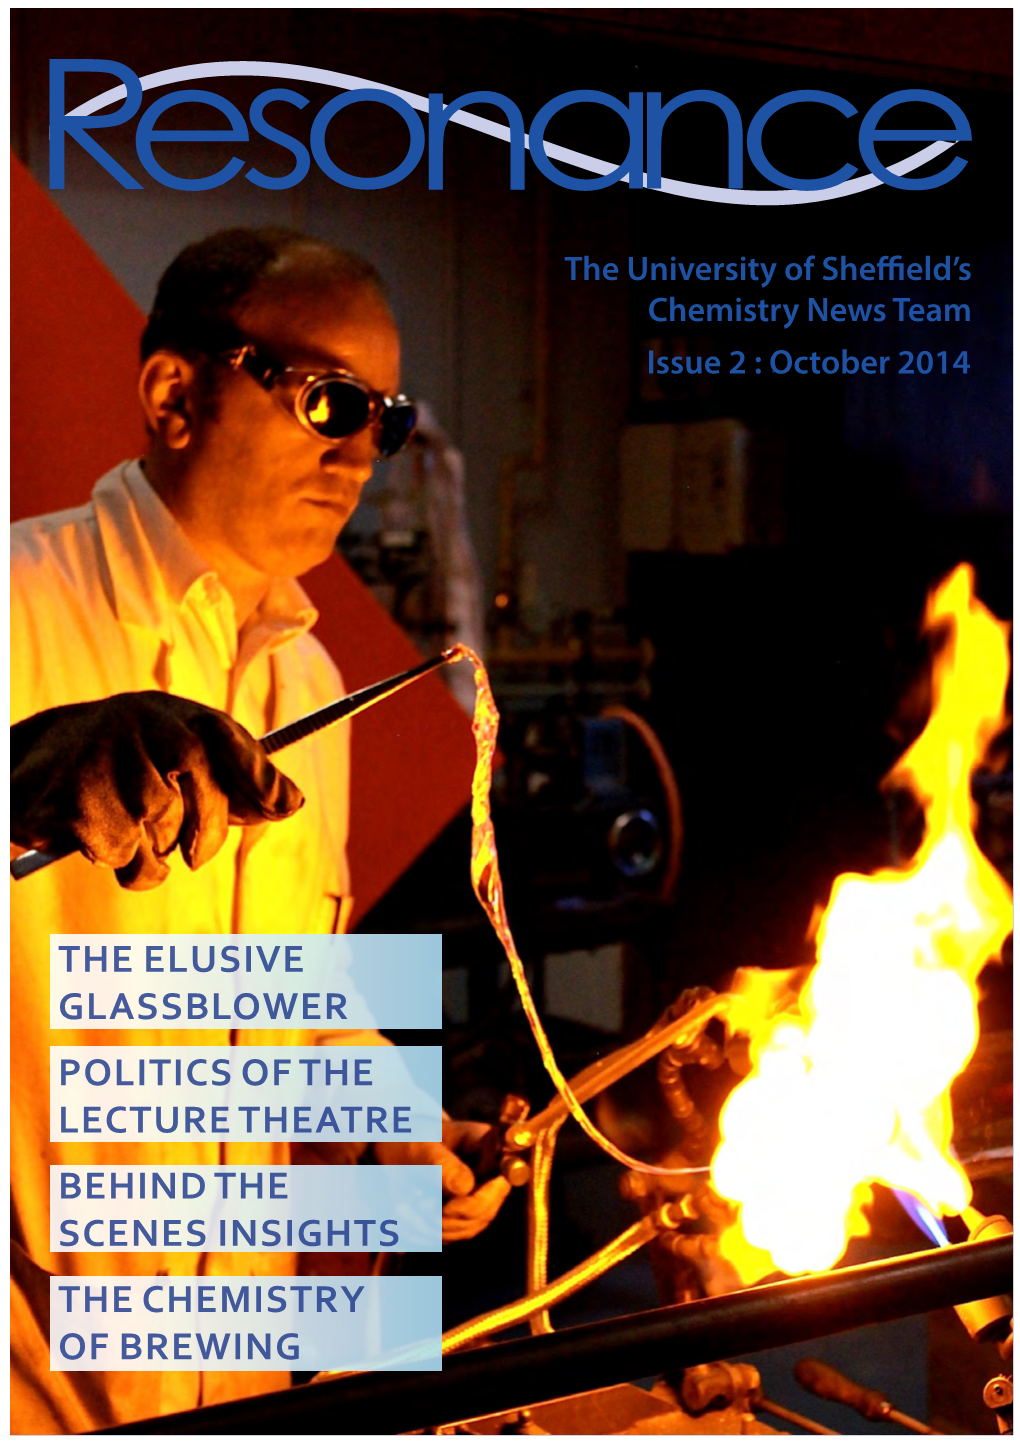 The Elusive Glassblower Politics of the Lecture Theatre Behind the Scenes Insights the Chemistry of Brewing